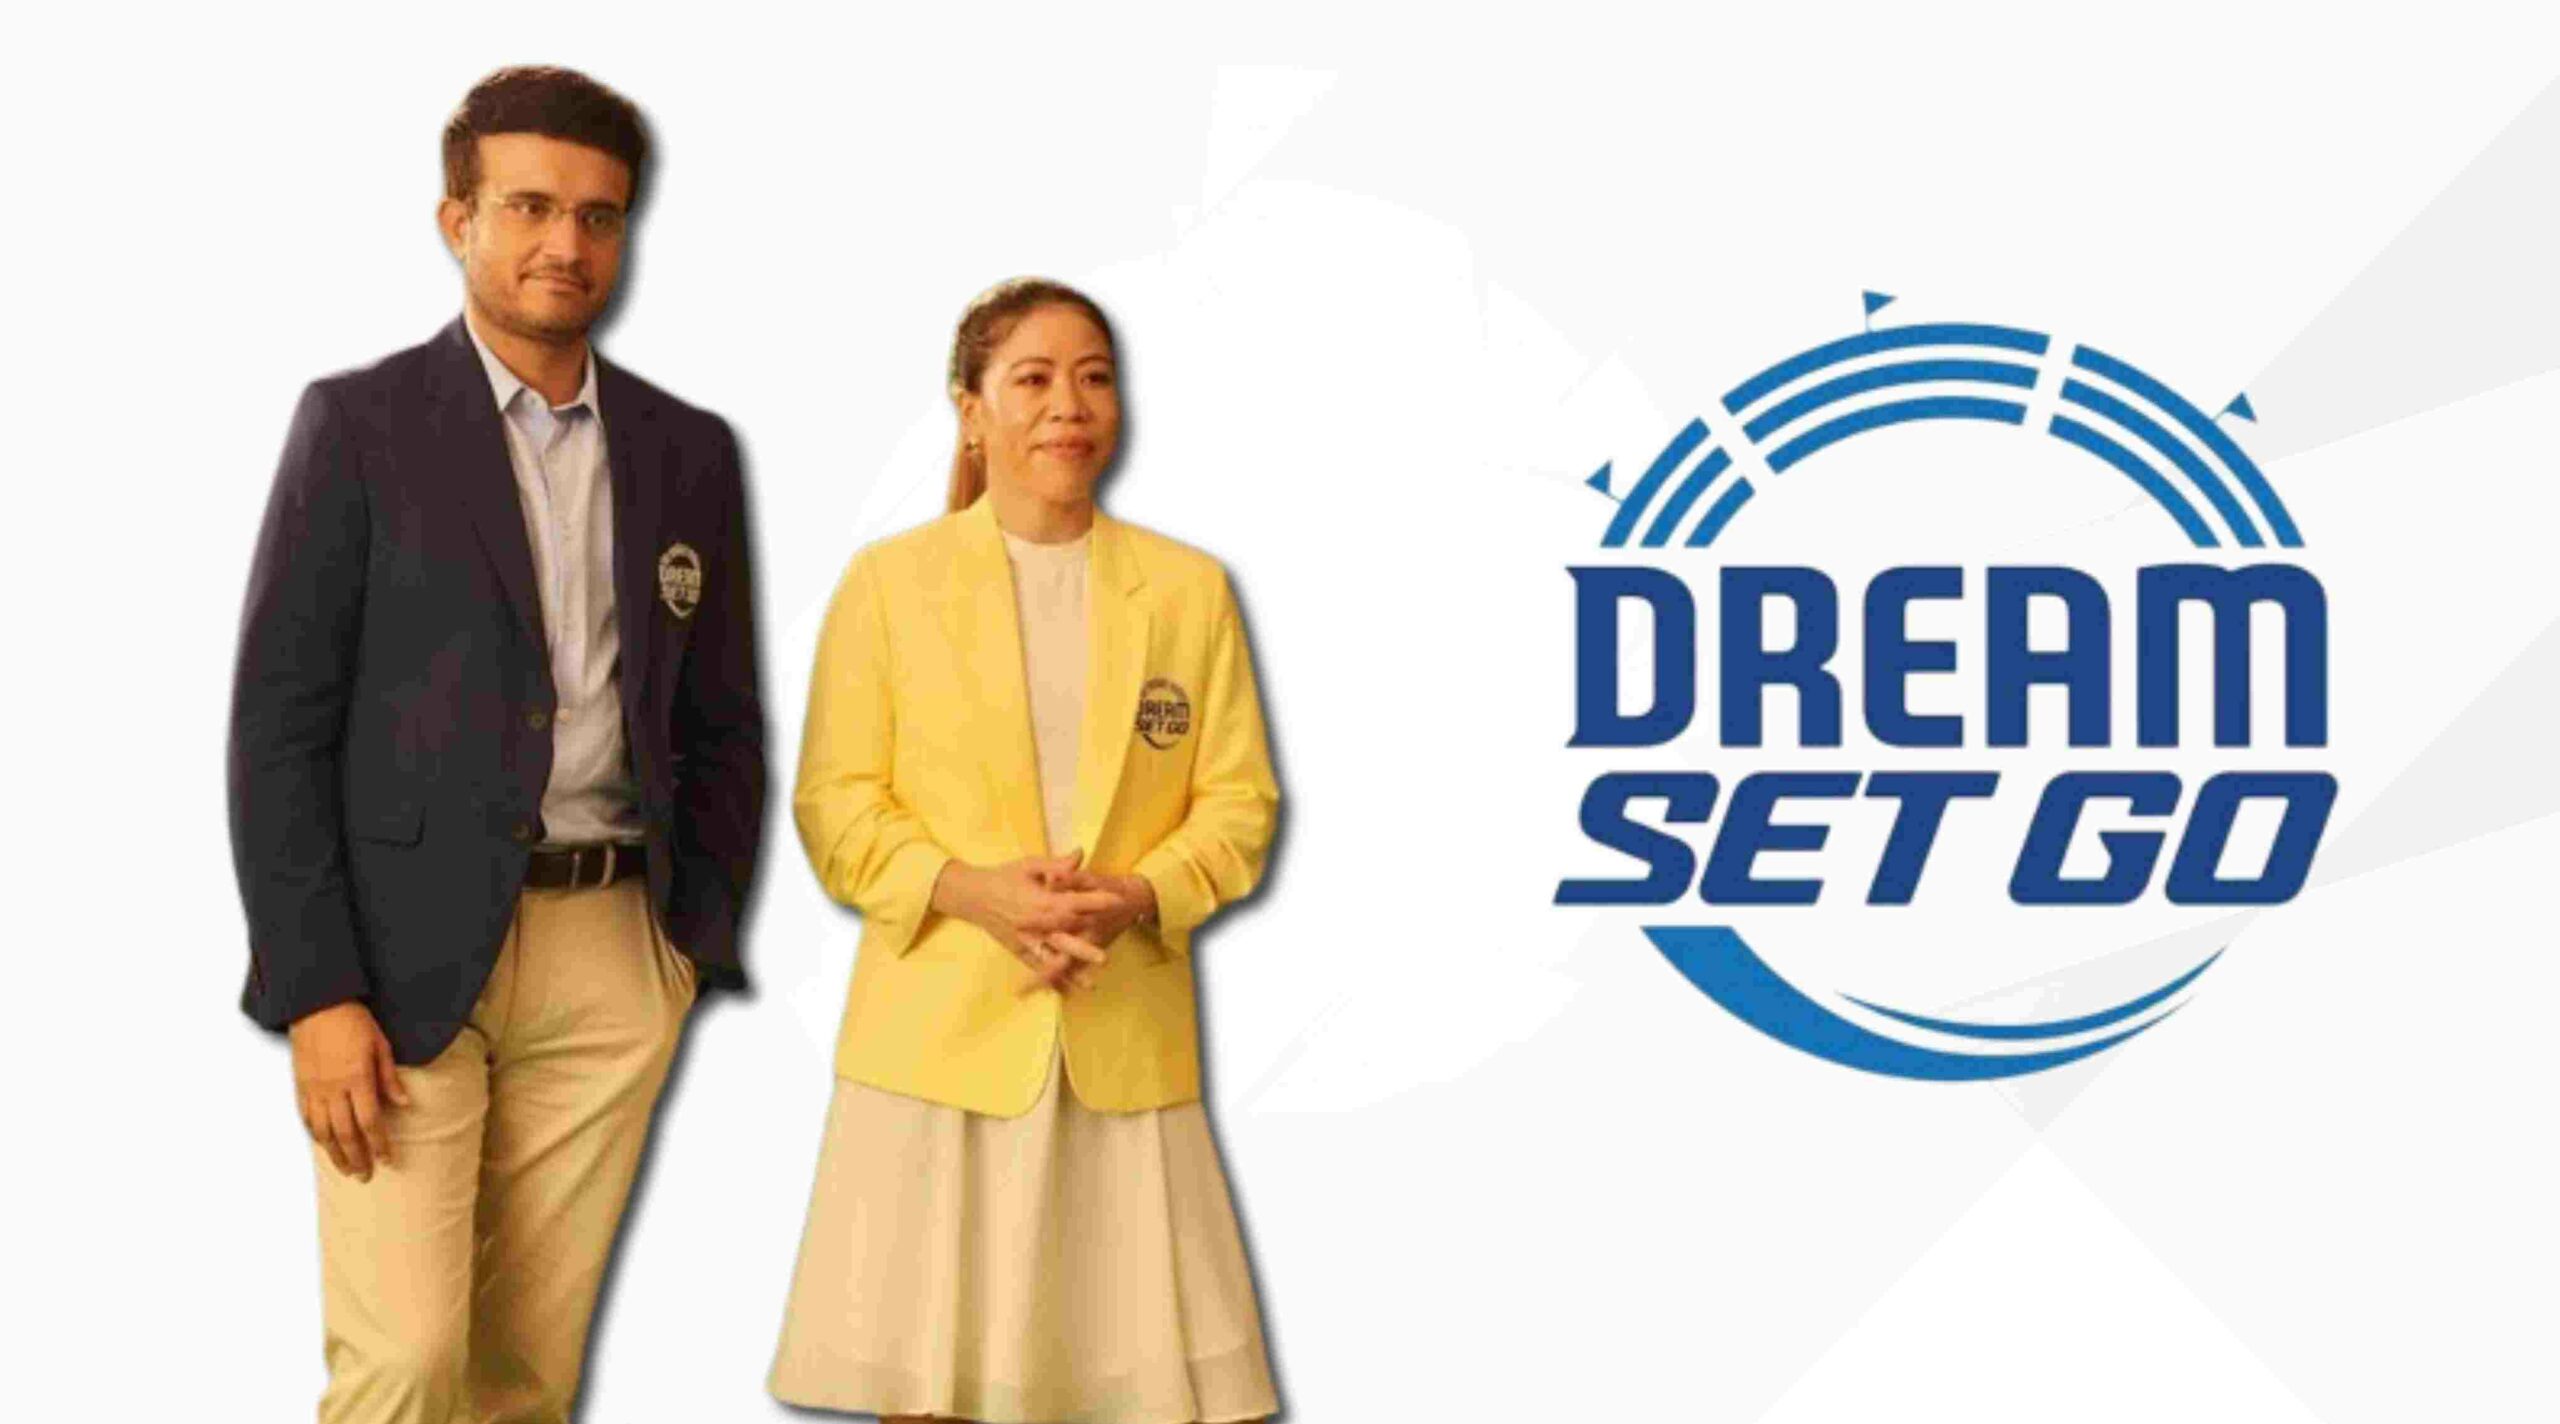 DreamSetGo launches new ad campaign 'Experience The Exclusive' featuring Sourav Ganguly and Mary Kom